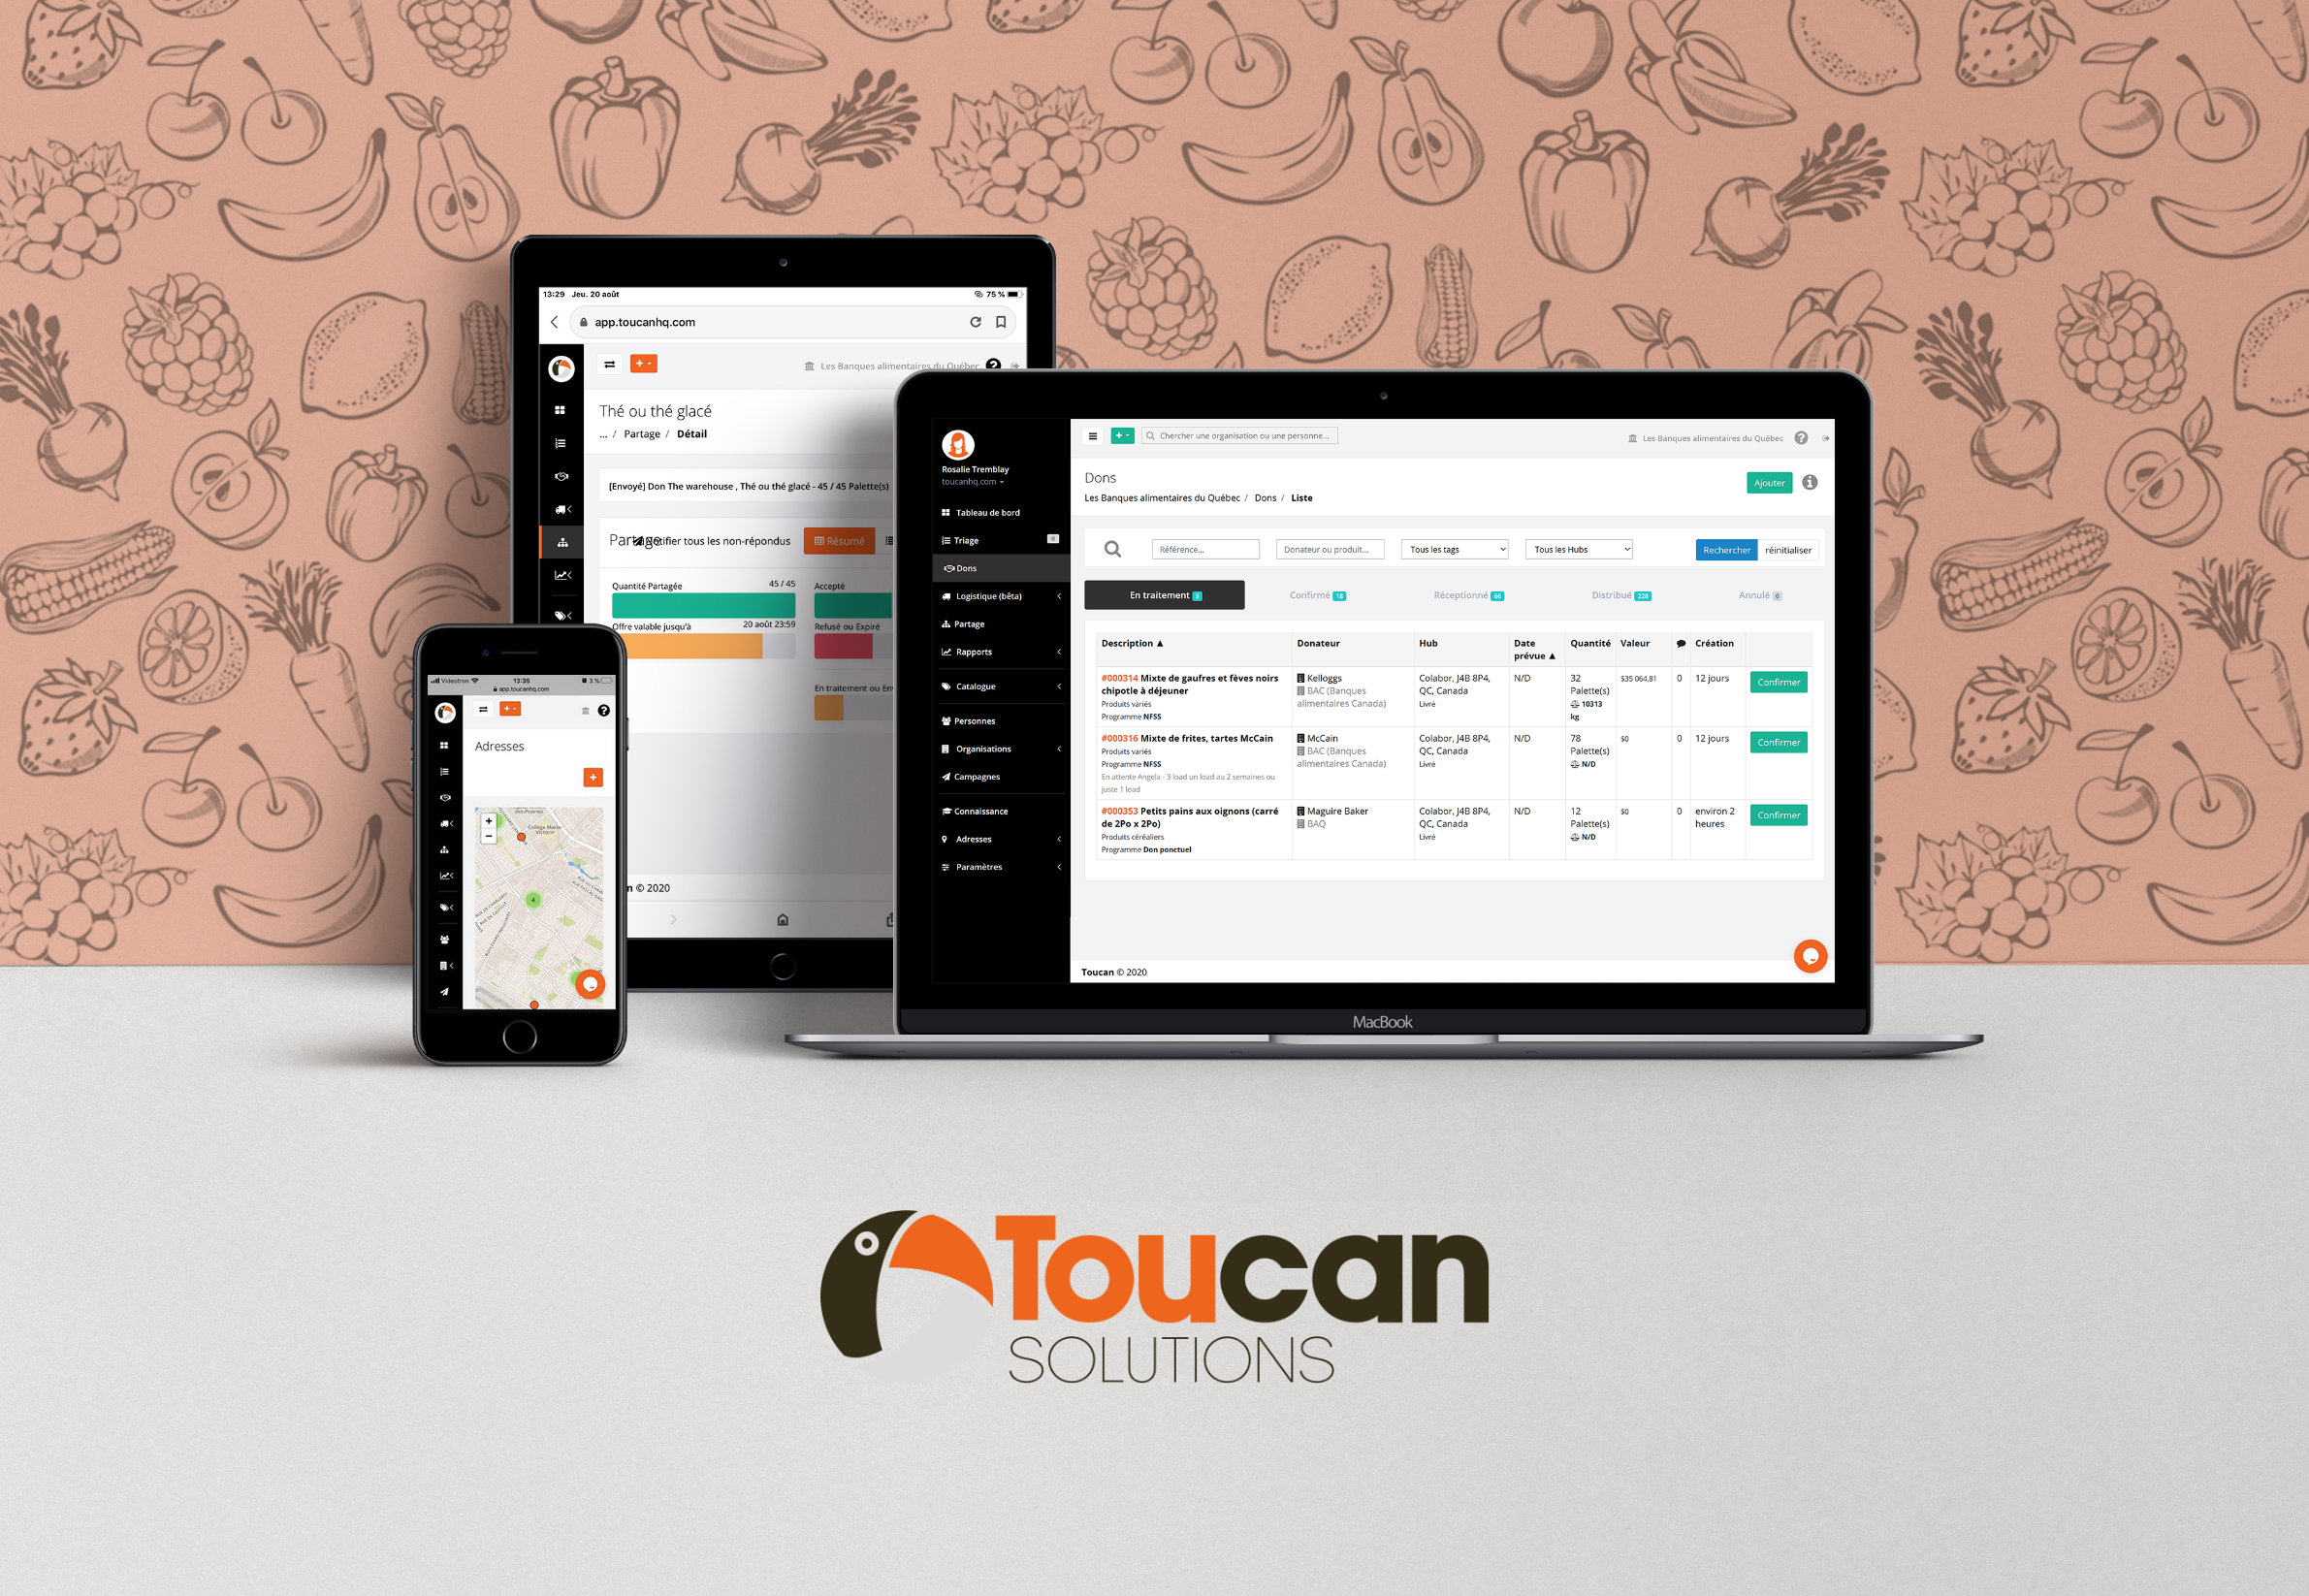 Gallery Toucan Solutions 2